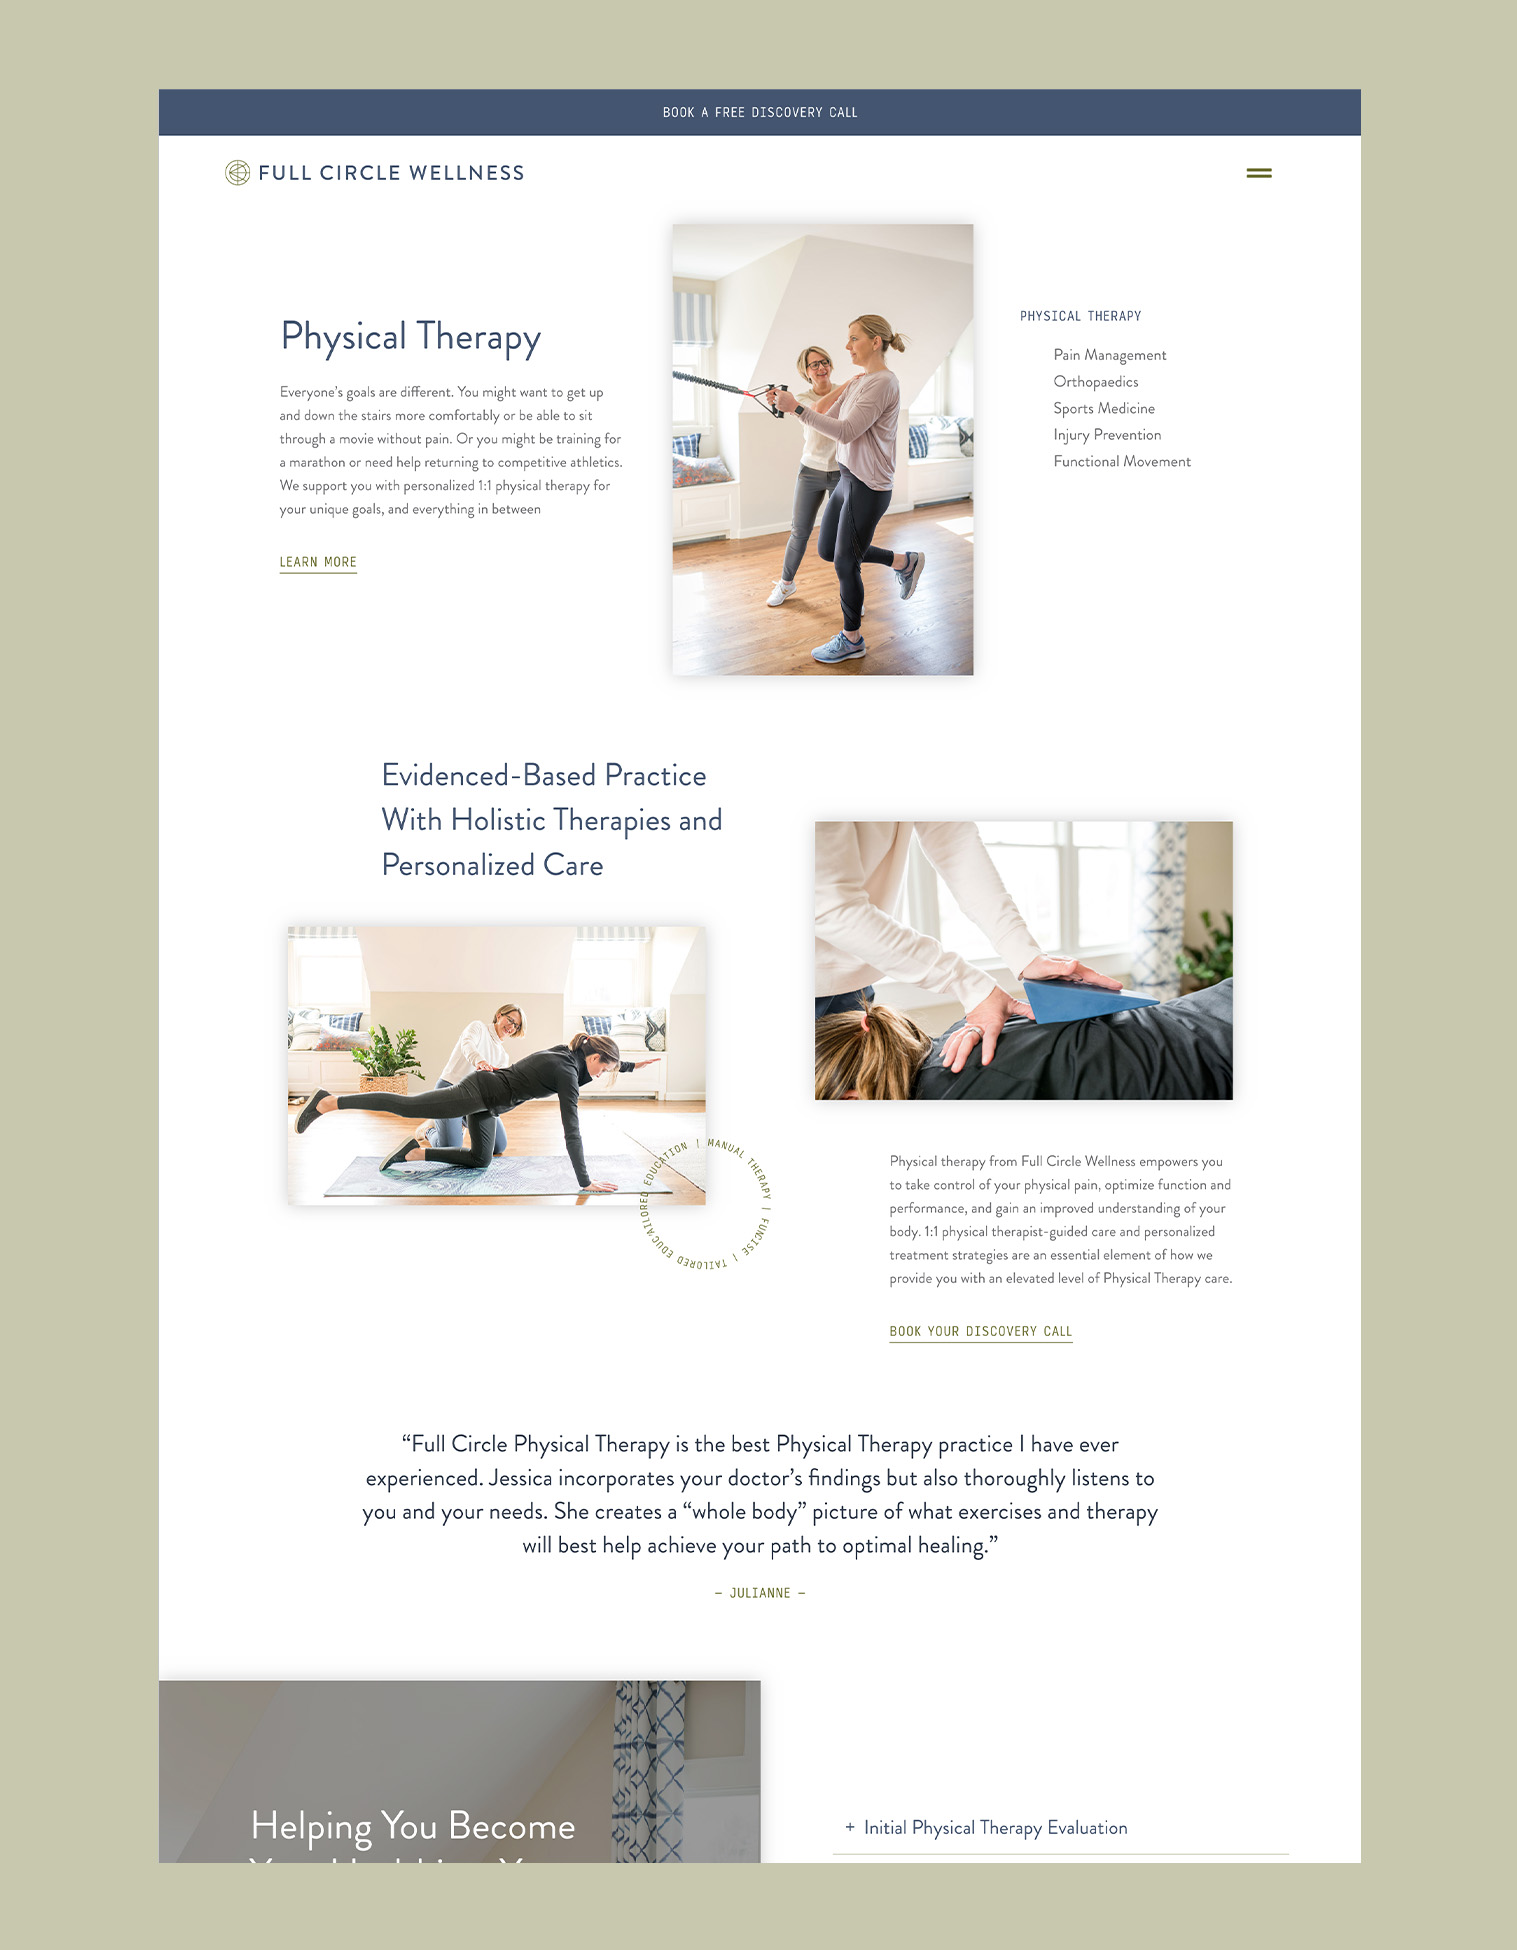 Website Design mockup for Full Circle Wellness - Whiskey and Red Small Business Branding and Website Design Packages